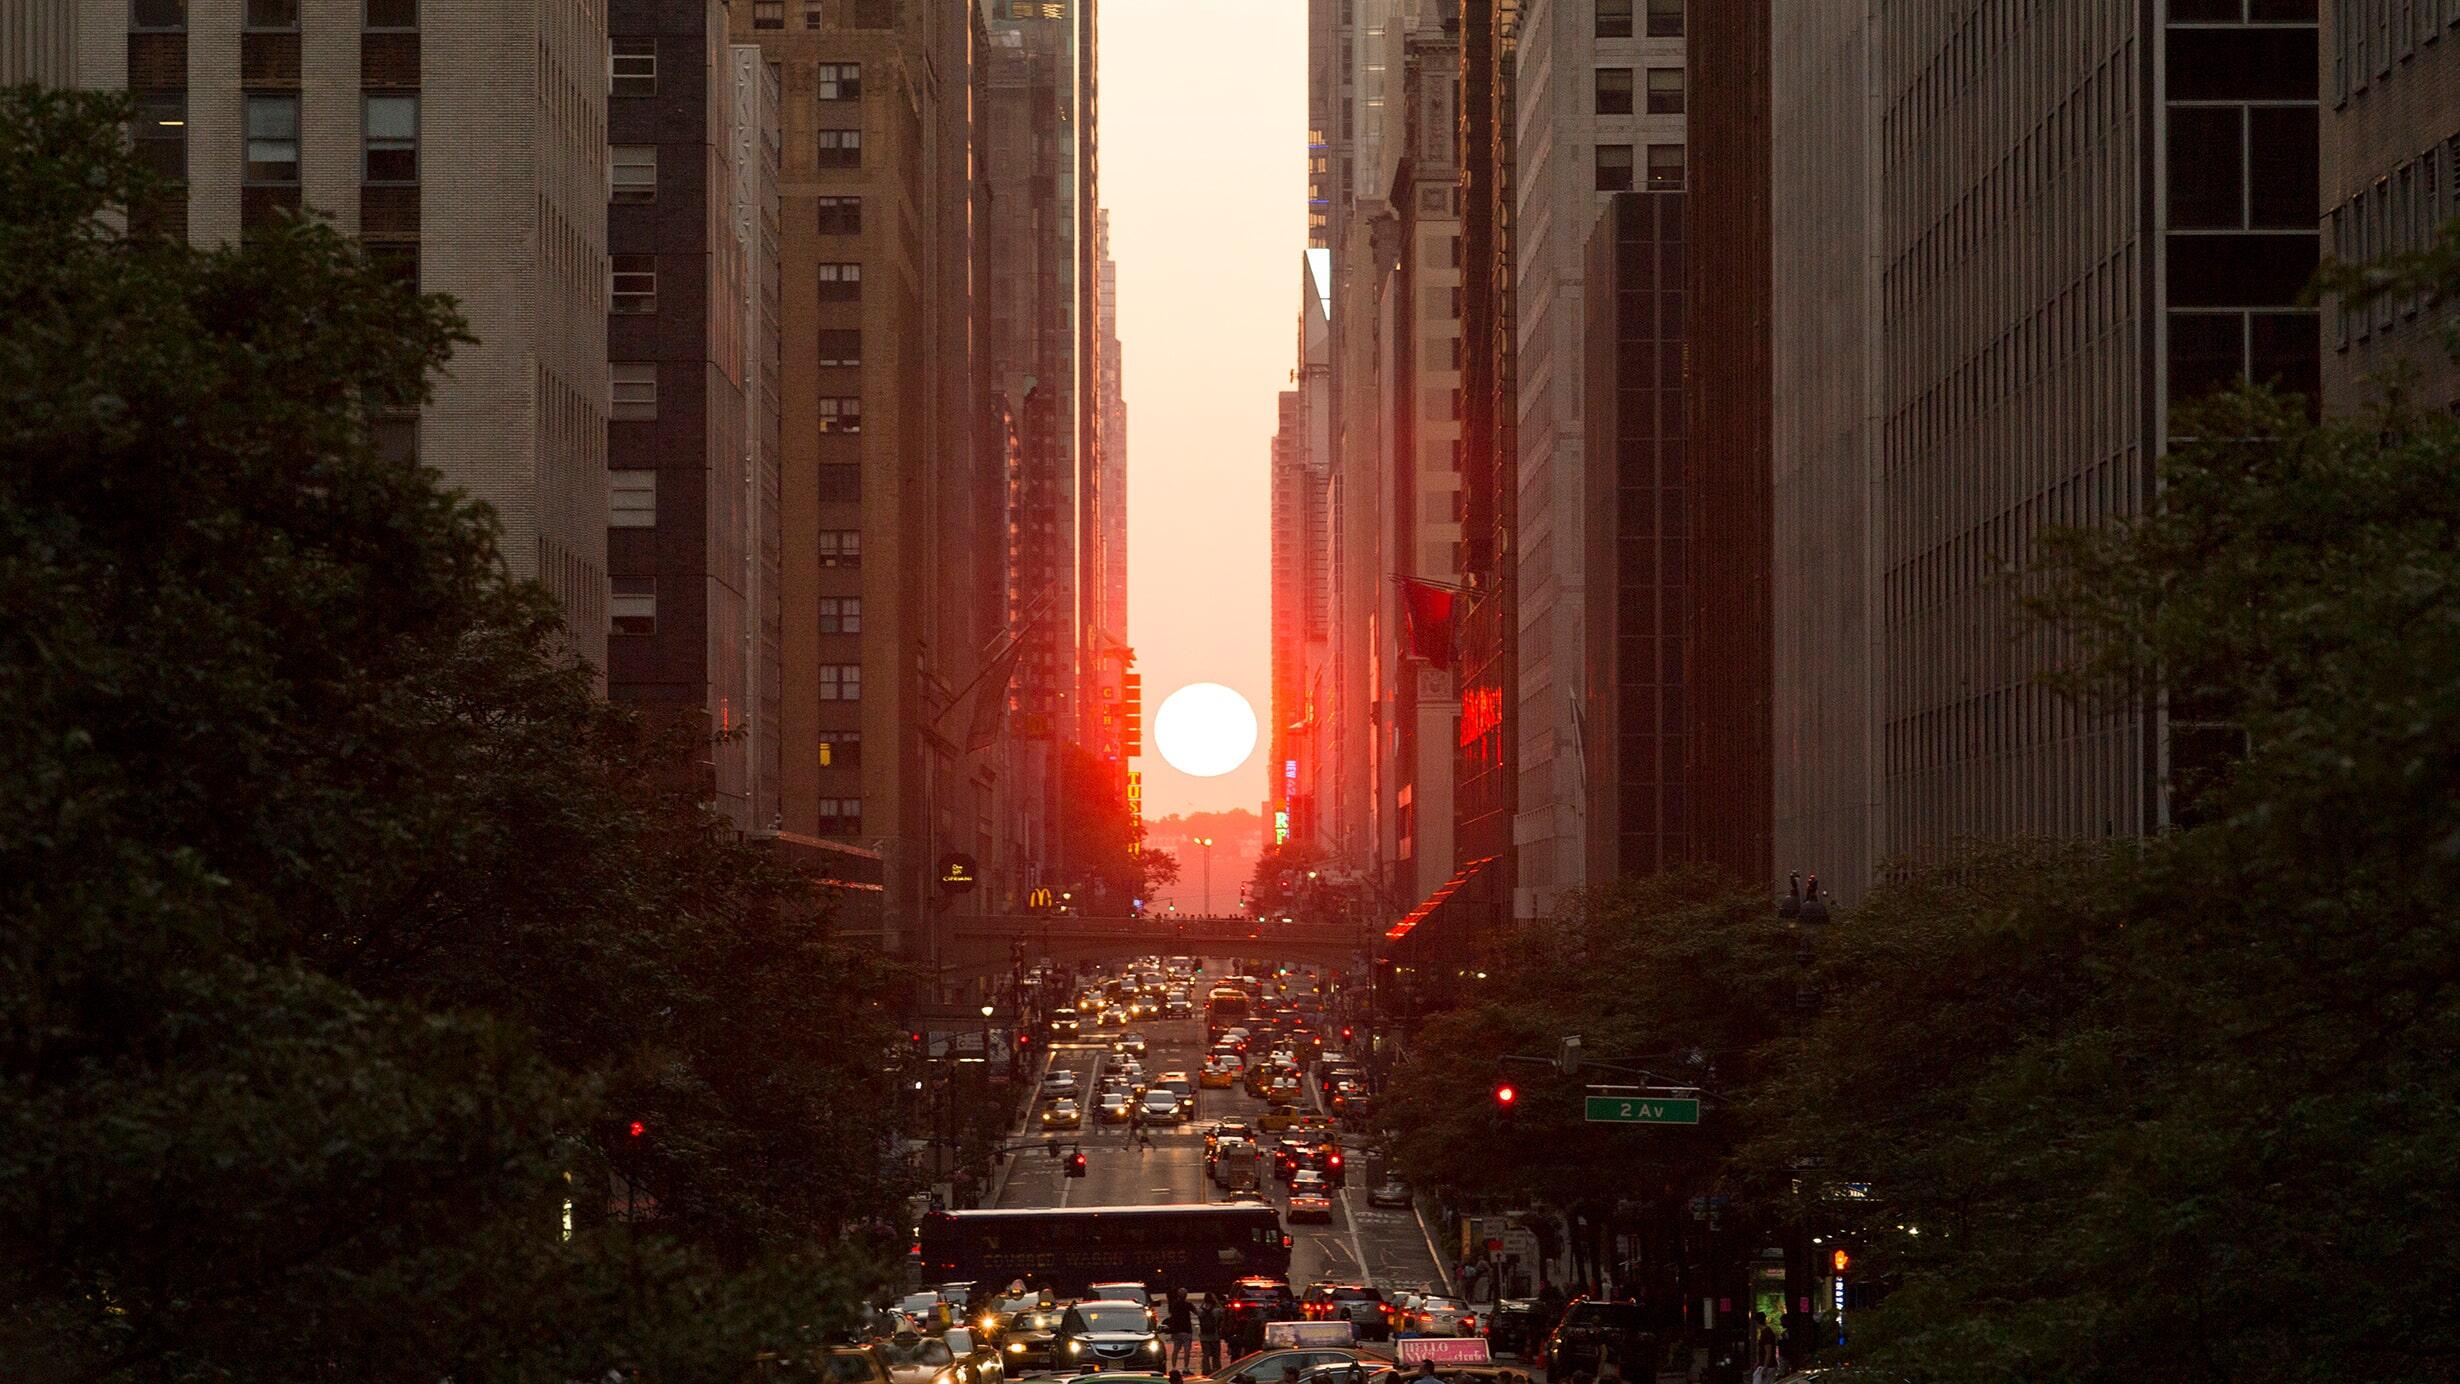 The setting sun, seen perfectly framed by the city street grid while facing west in New York City - a twice-annual occurrence known as Manhattanhenge.